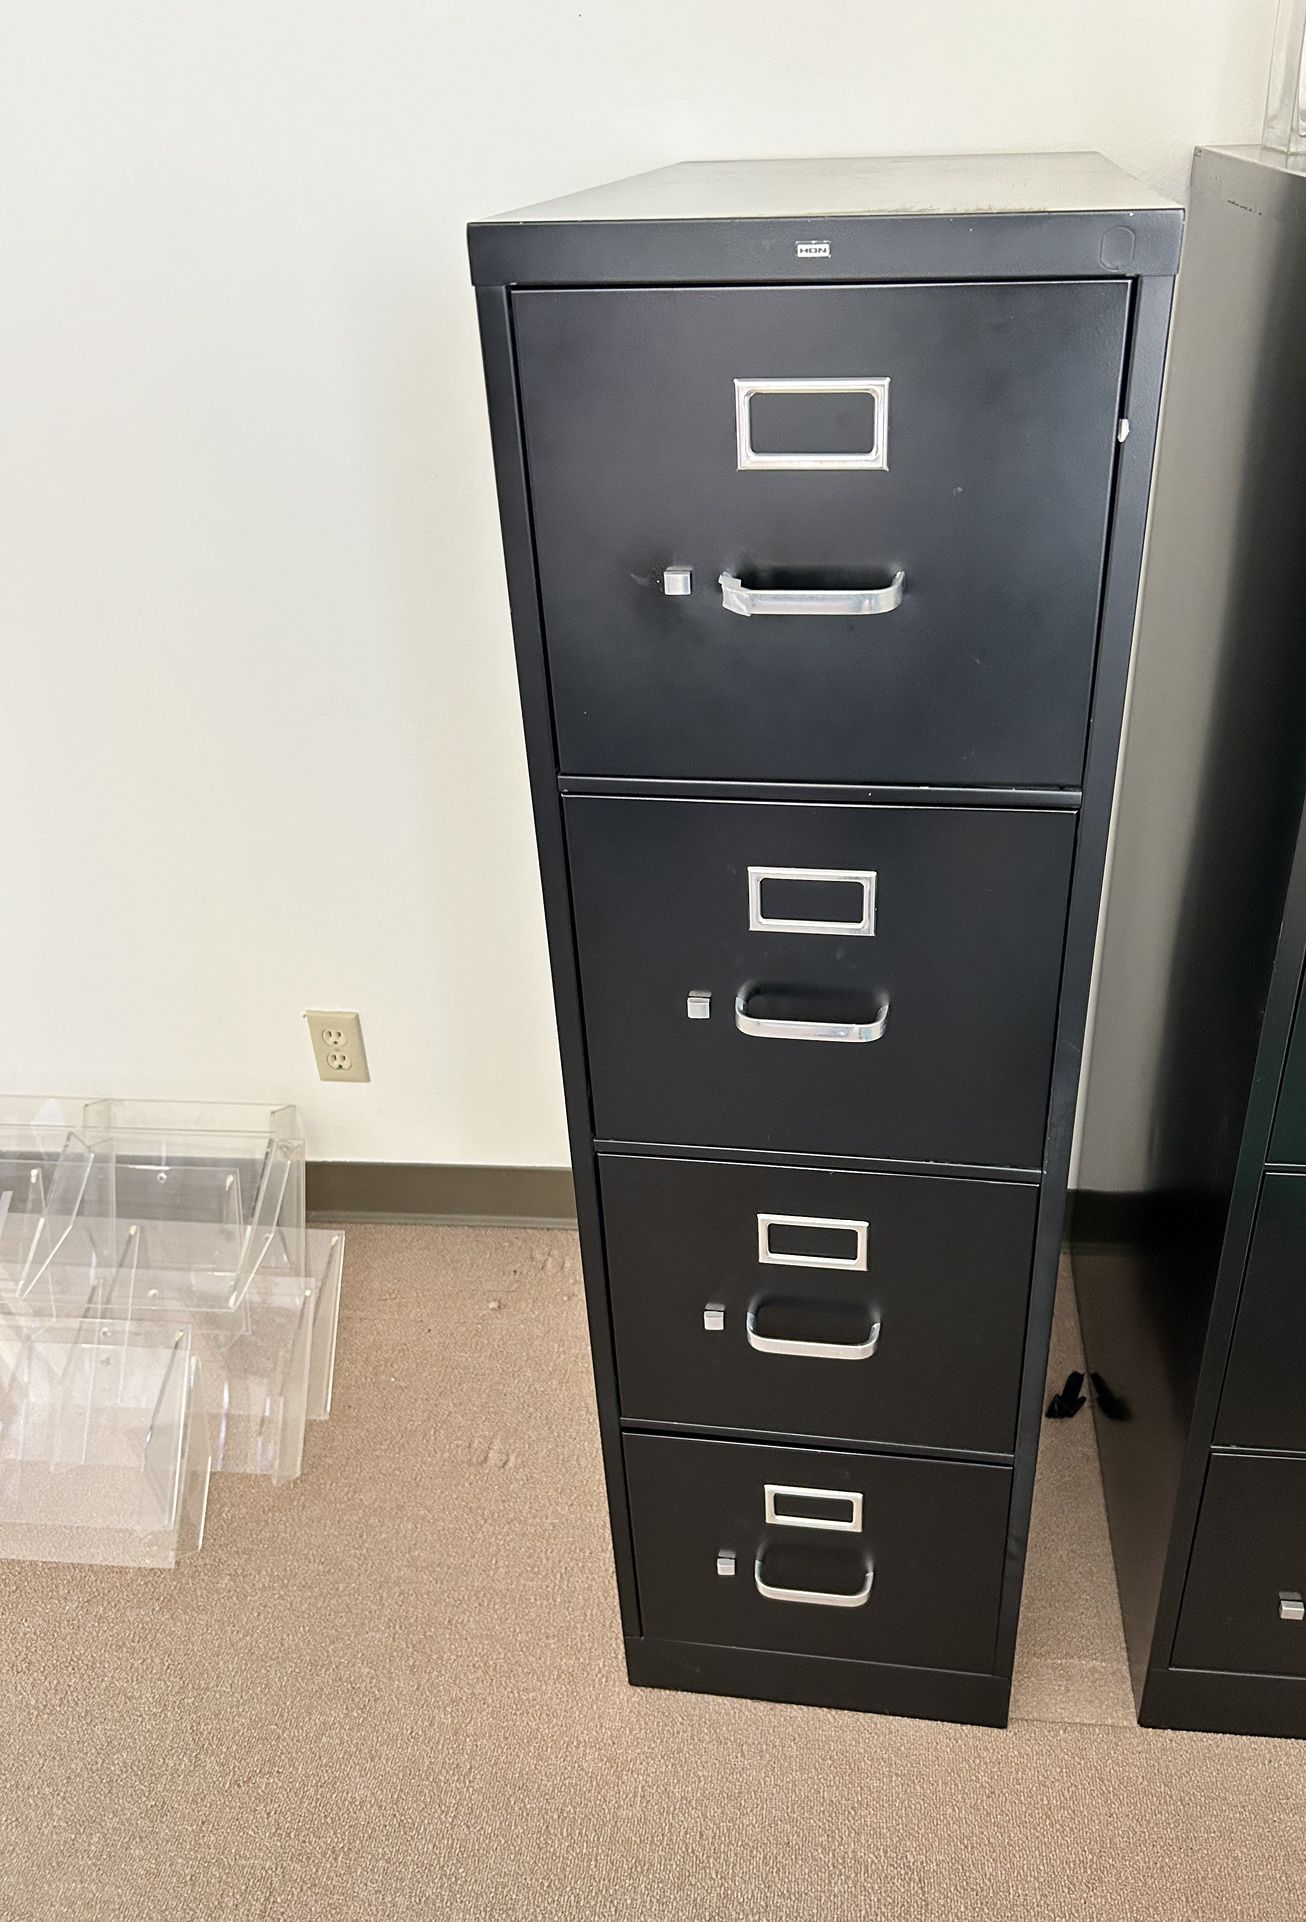 BOSS FILE CABINET 4 DRAWERS Awesome!